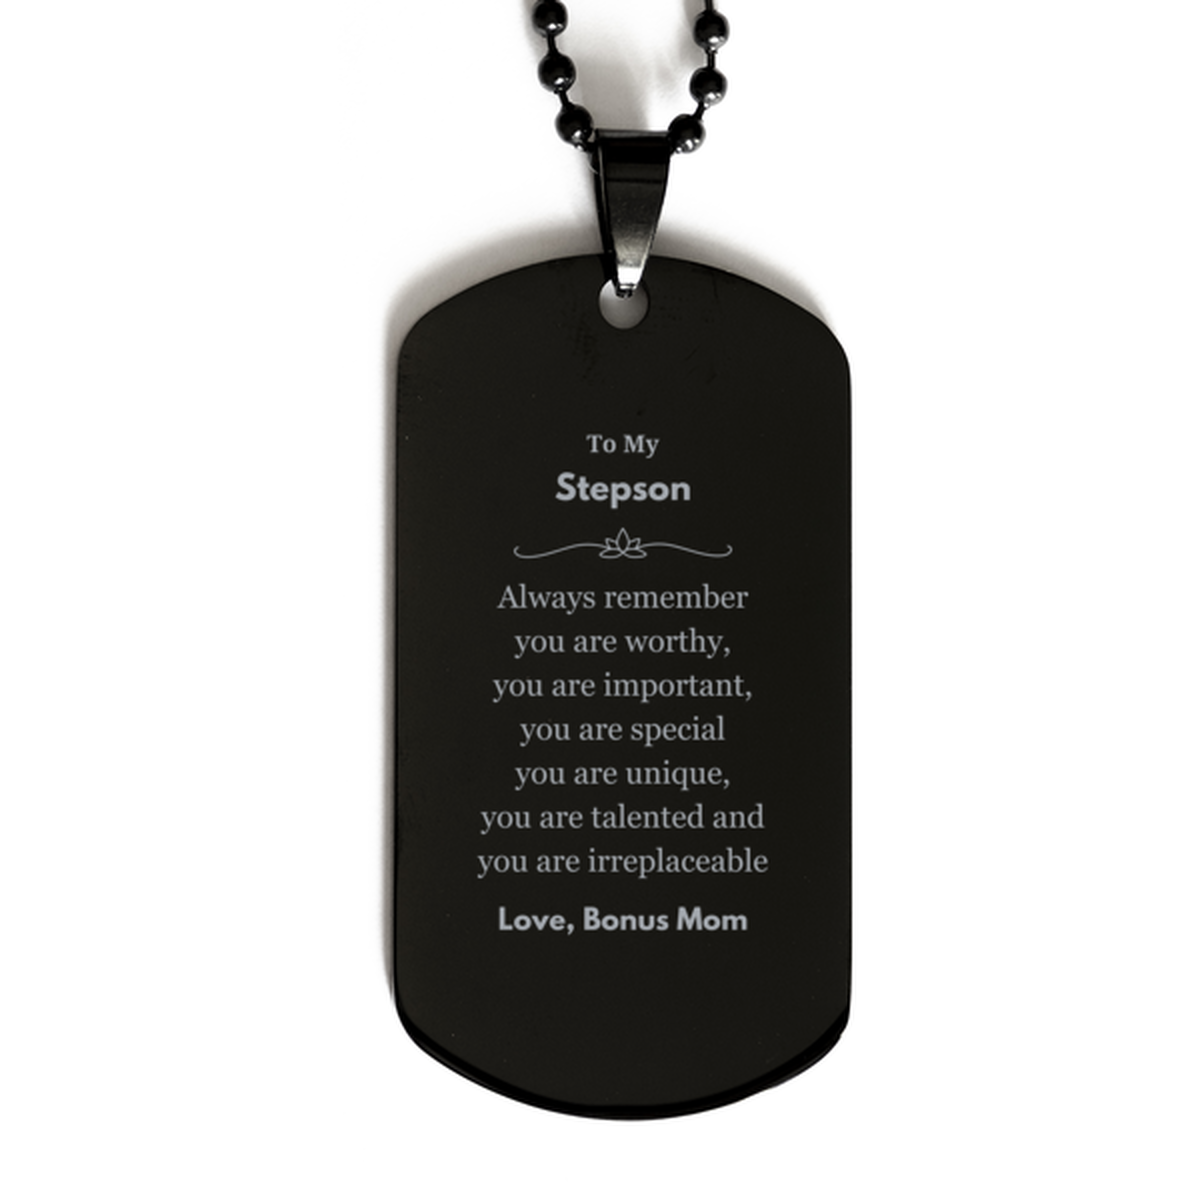 Stepson Birthday Gifts from Bonus Mom, Inspirational Black Dog Tag for Stepson Christmas Graduation Gifts for Stepson Always remember you are worthy, you are important. Love, Bonus Mom